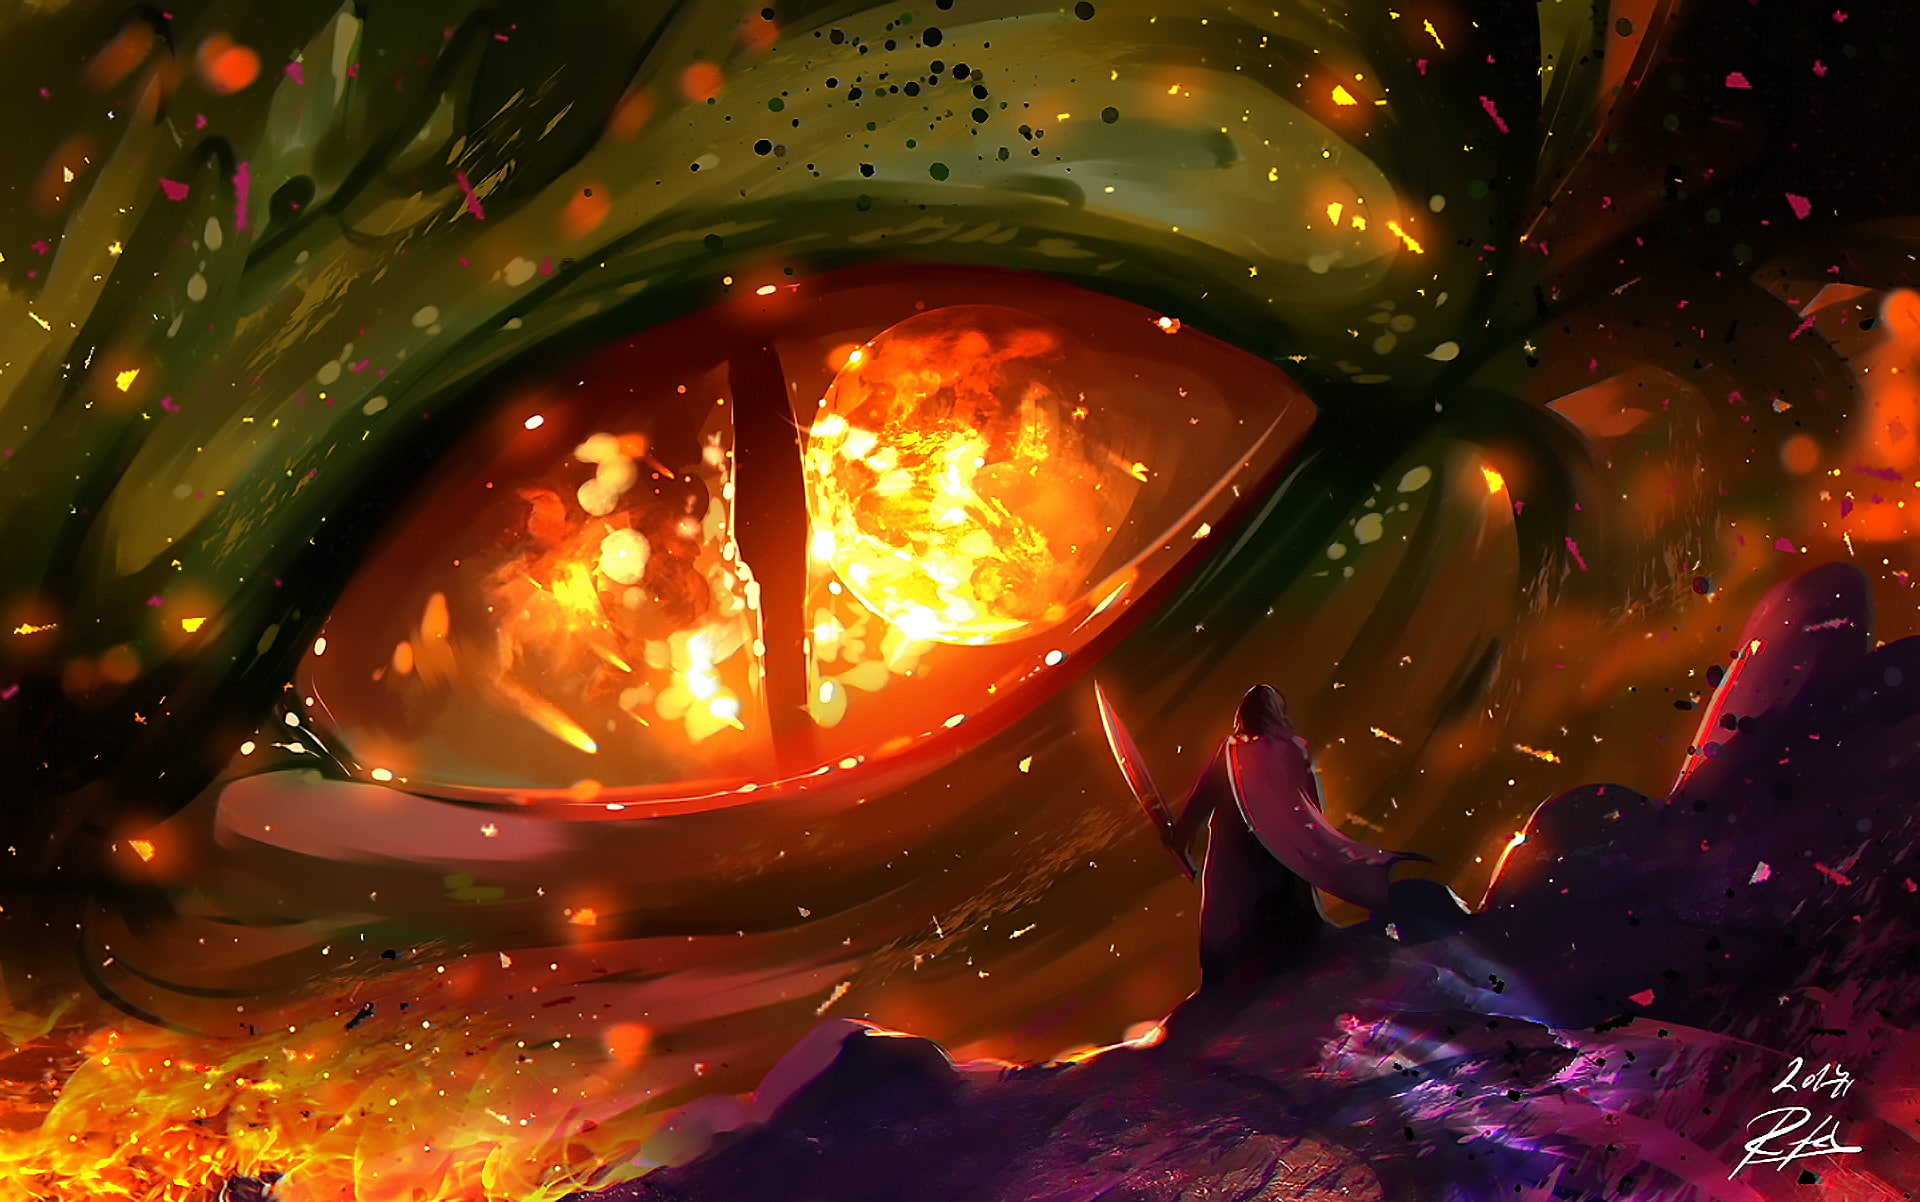 dragon, eye, close-up, knight, fire, painting, Fantasy, no people